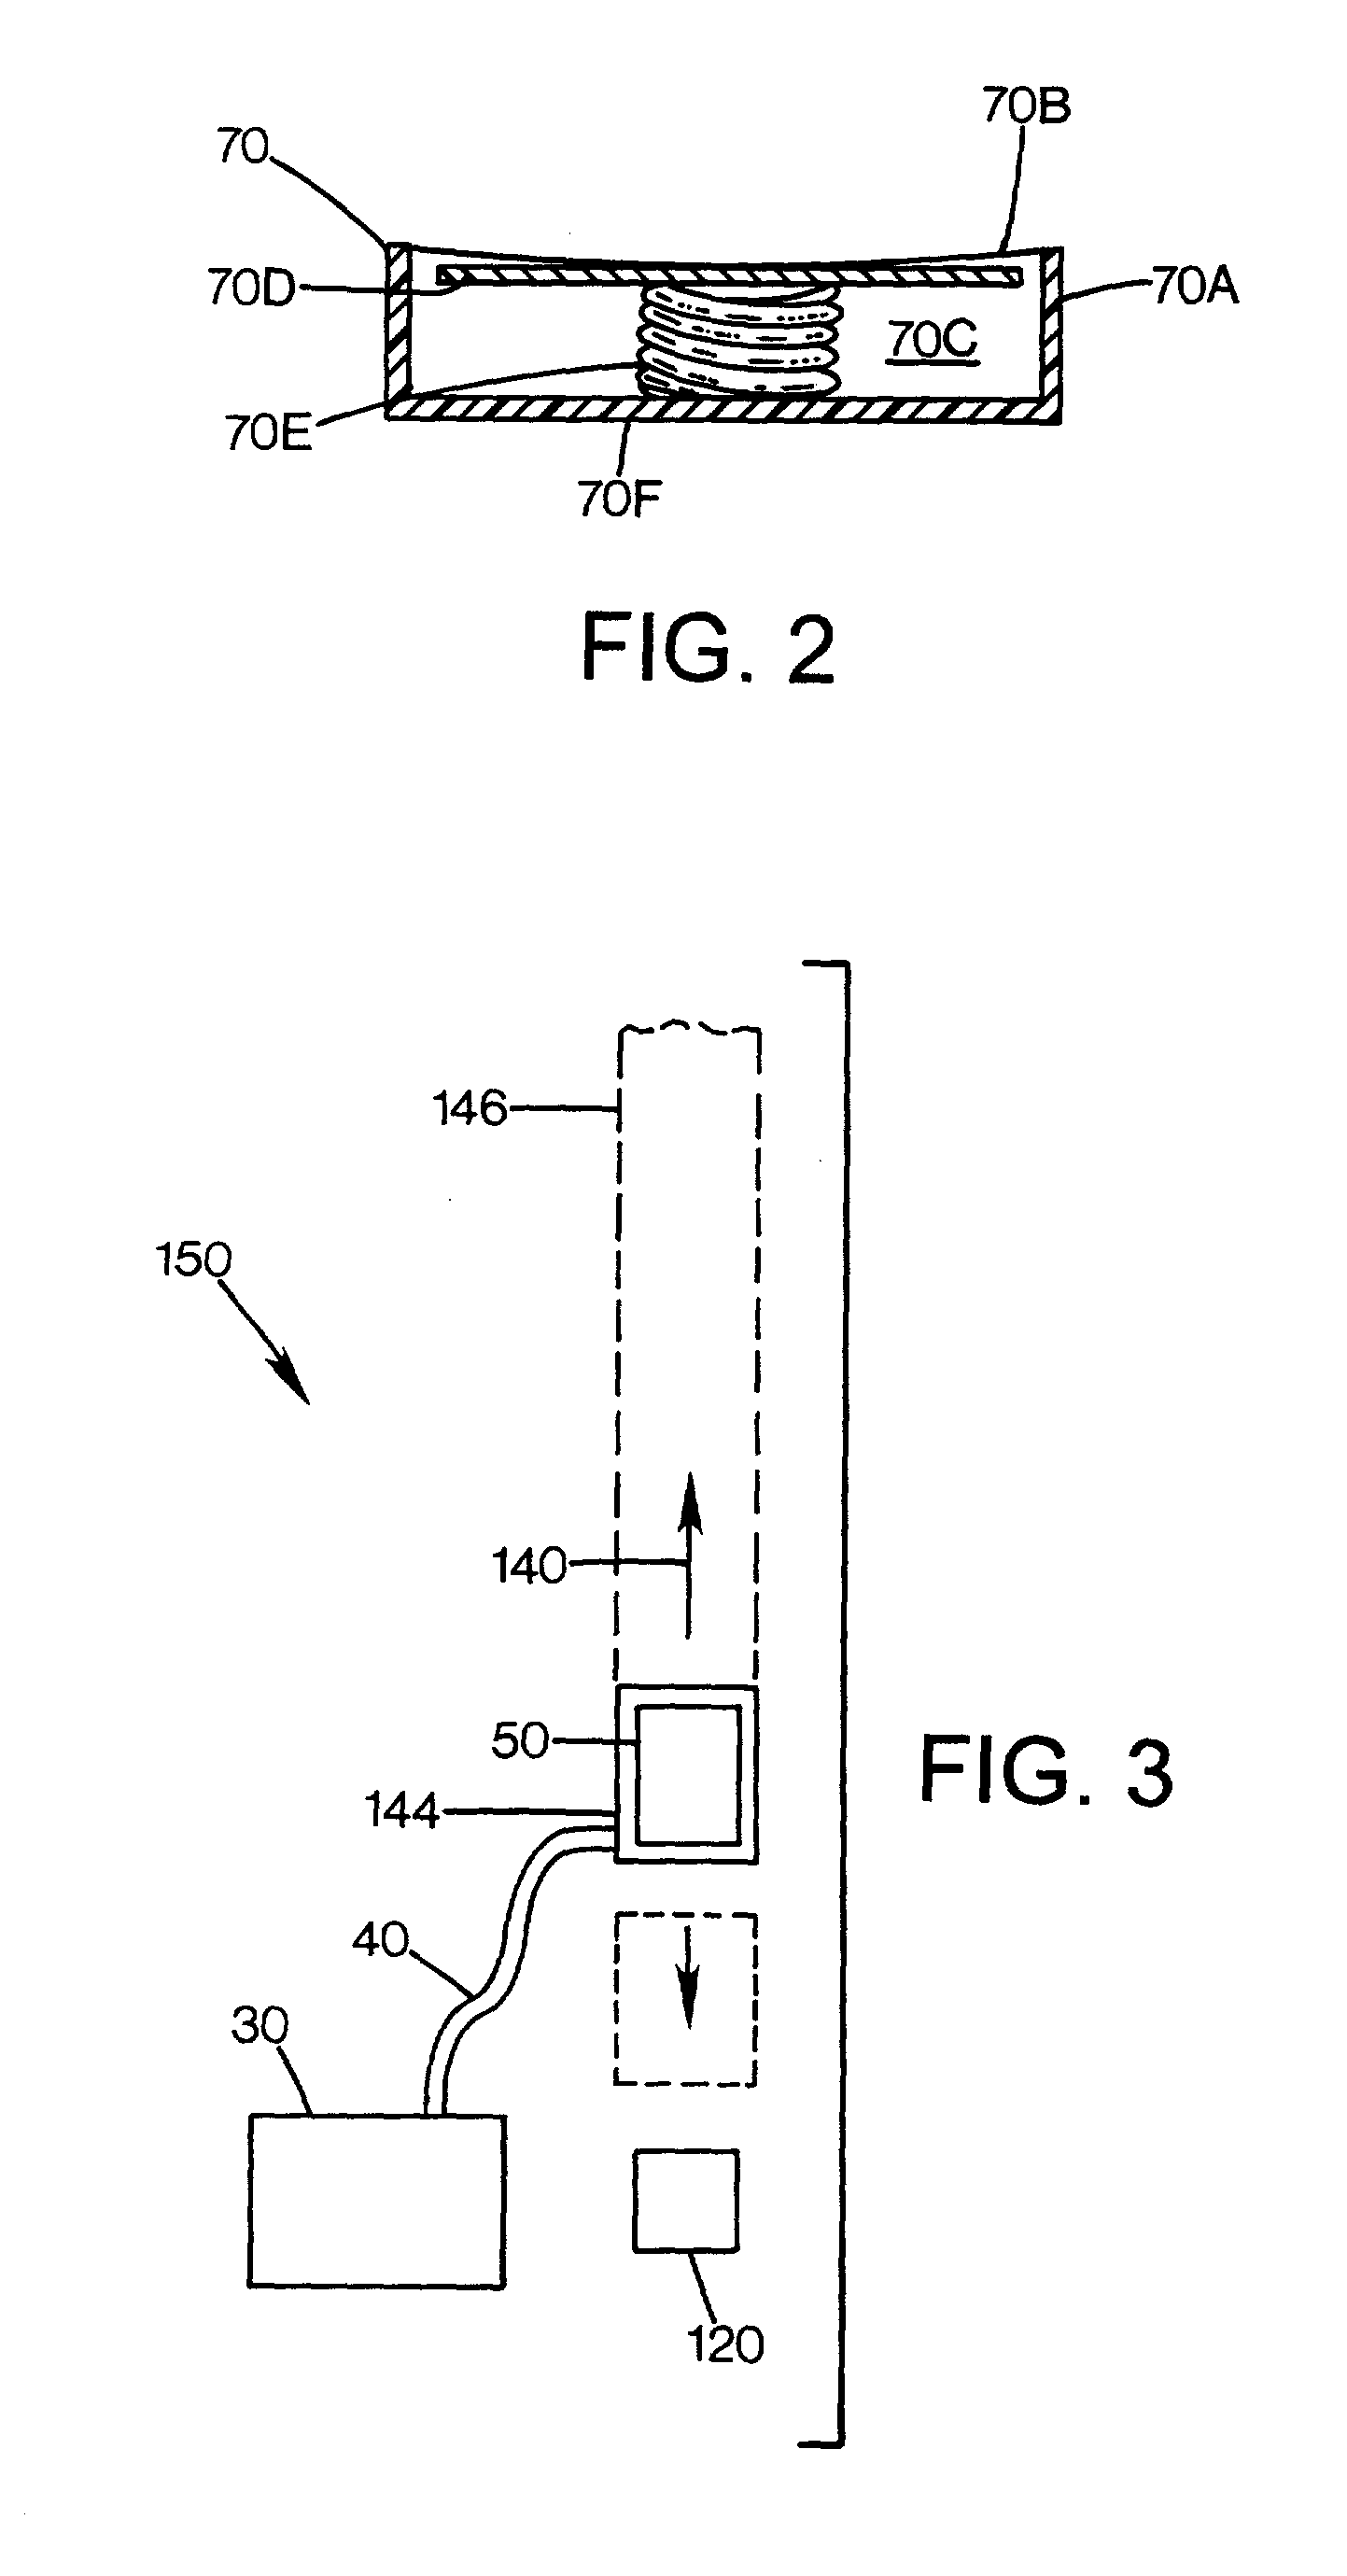 Re-circulating fluid delivery system